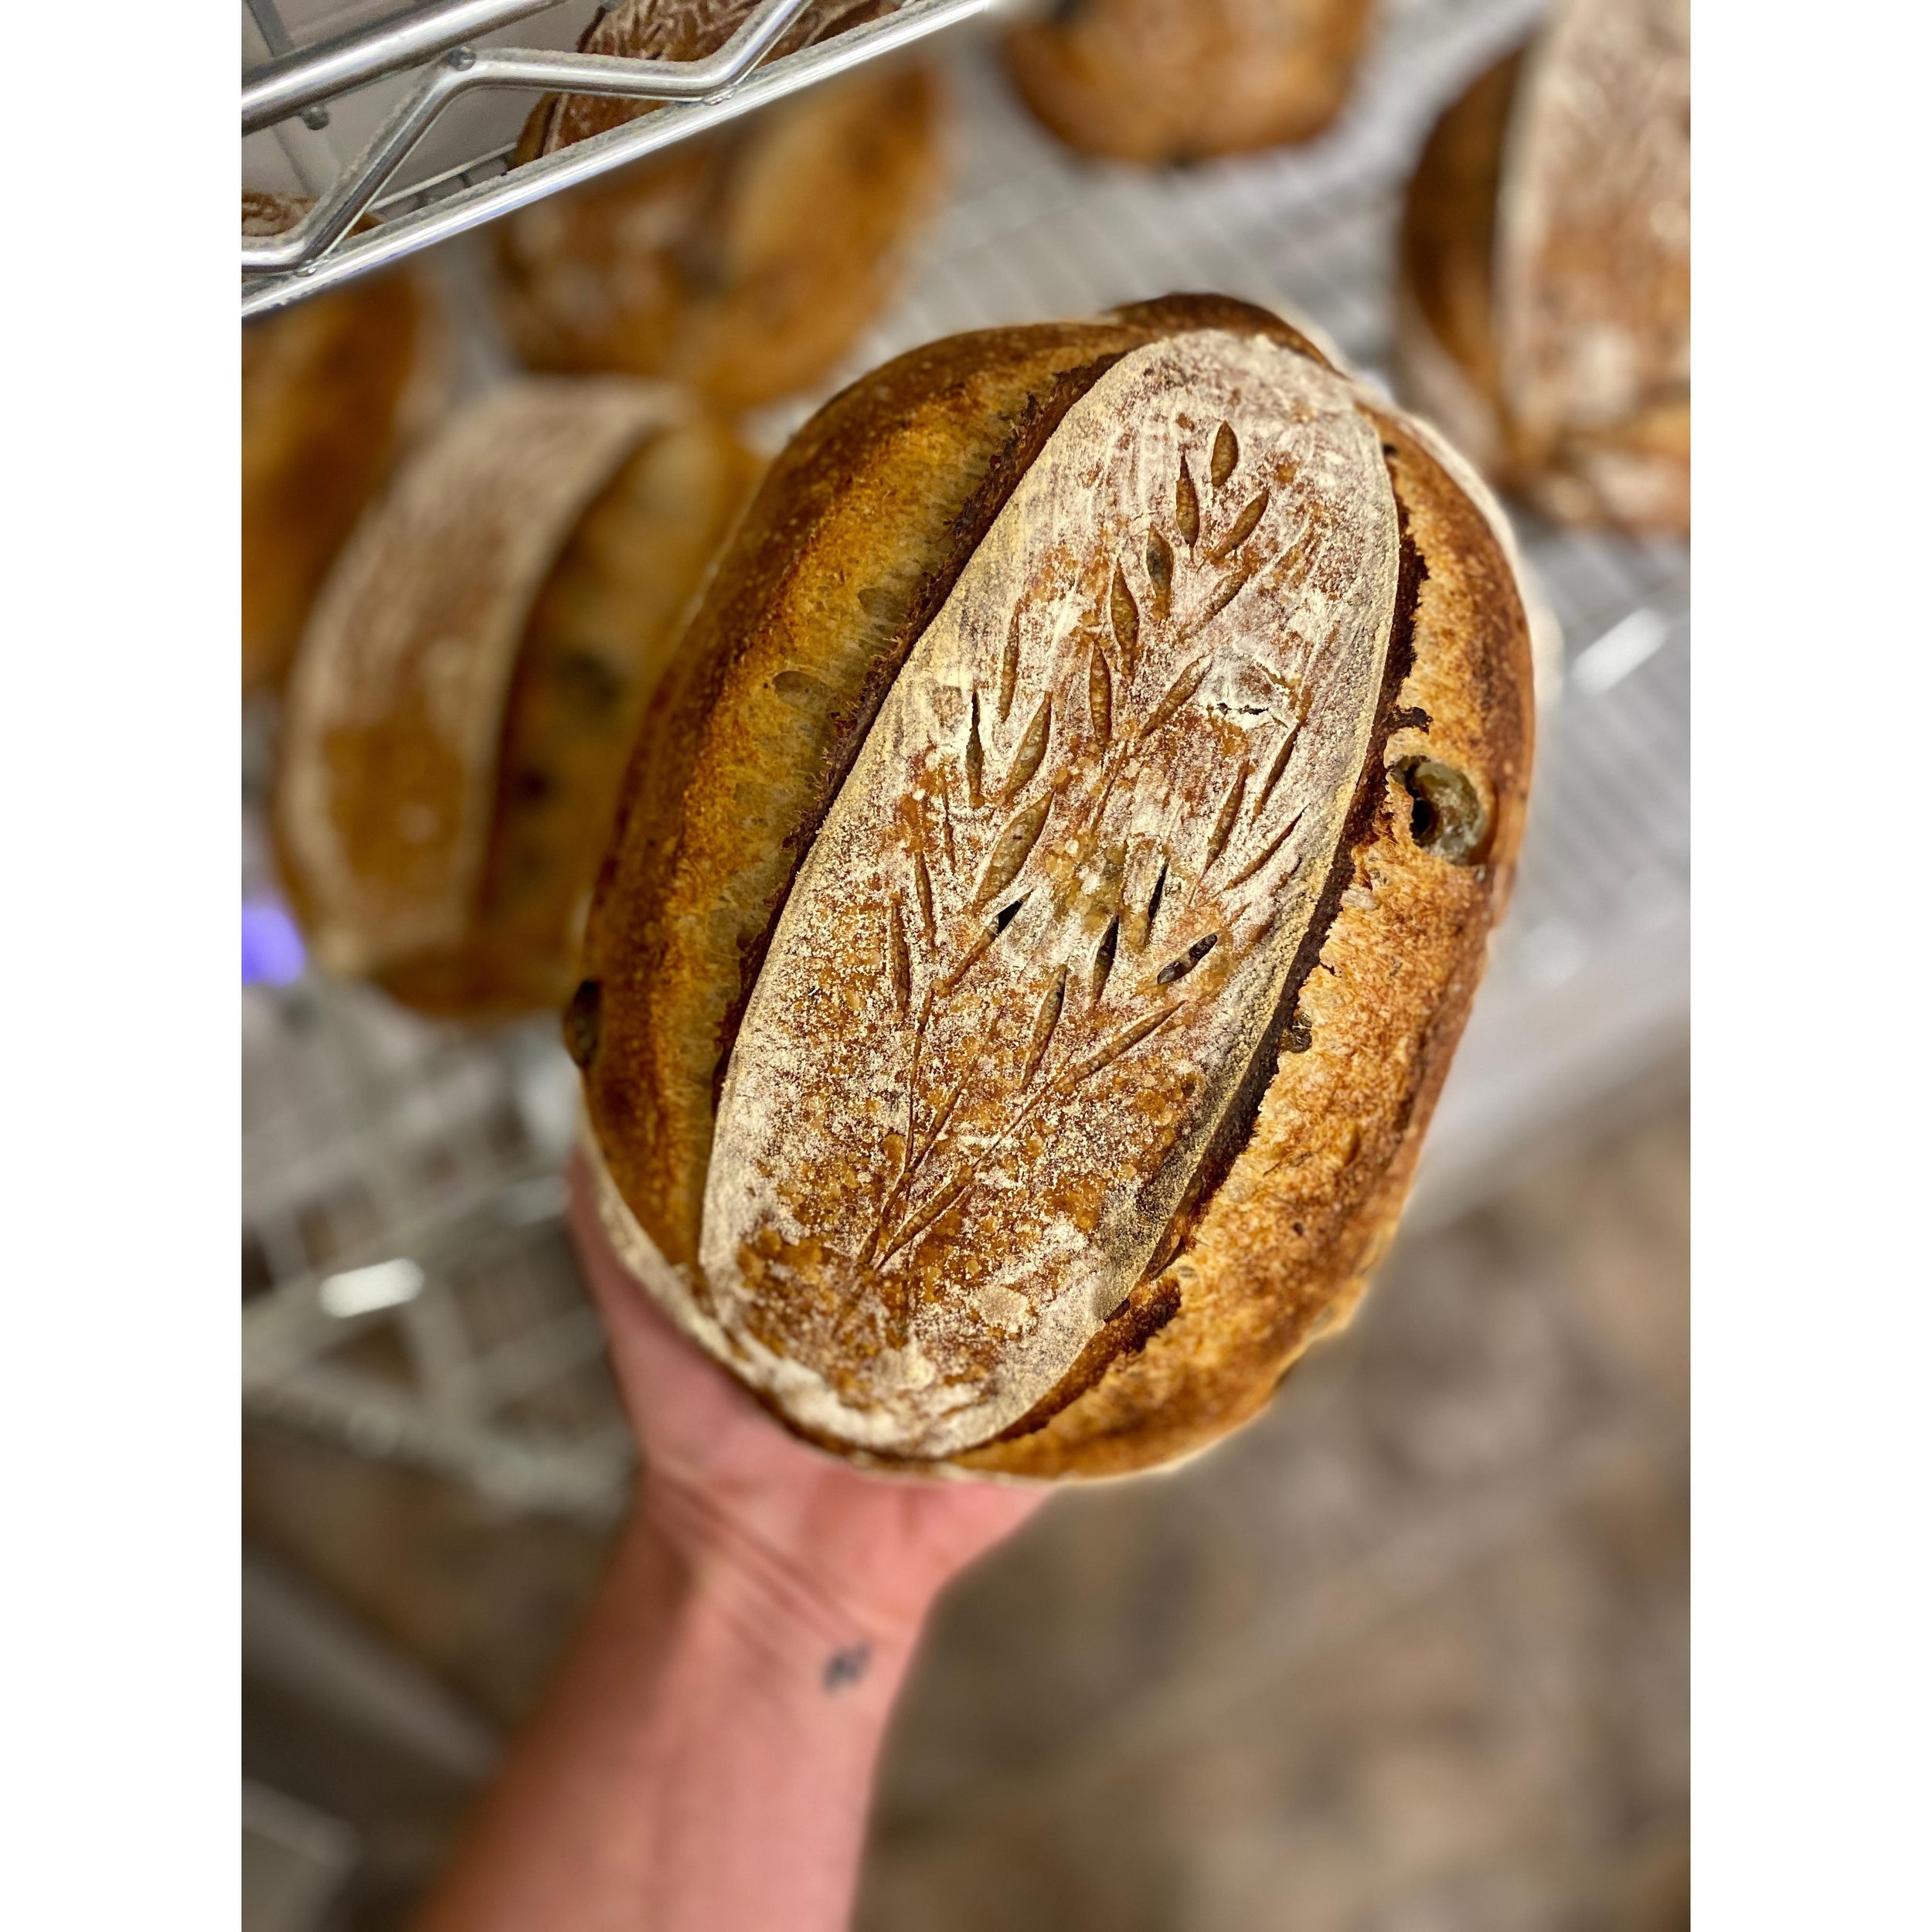 Olive &amp; Herb is back this week along with Roasted Garlic, Cheddar Herb, Rye Country, Babka and Turkey Red Baguettes. All naturally leavened :) Order at link in bio [sprucehousebread.com]